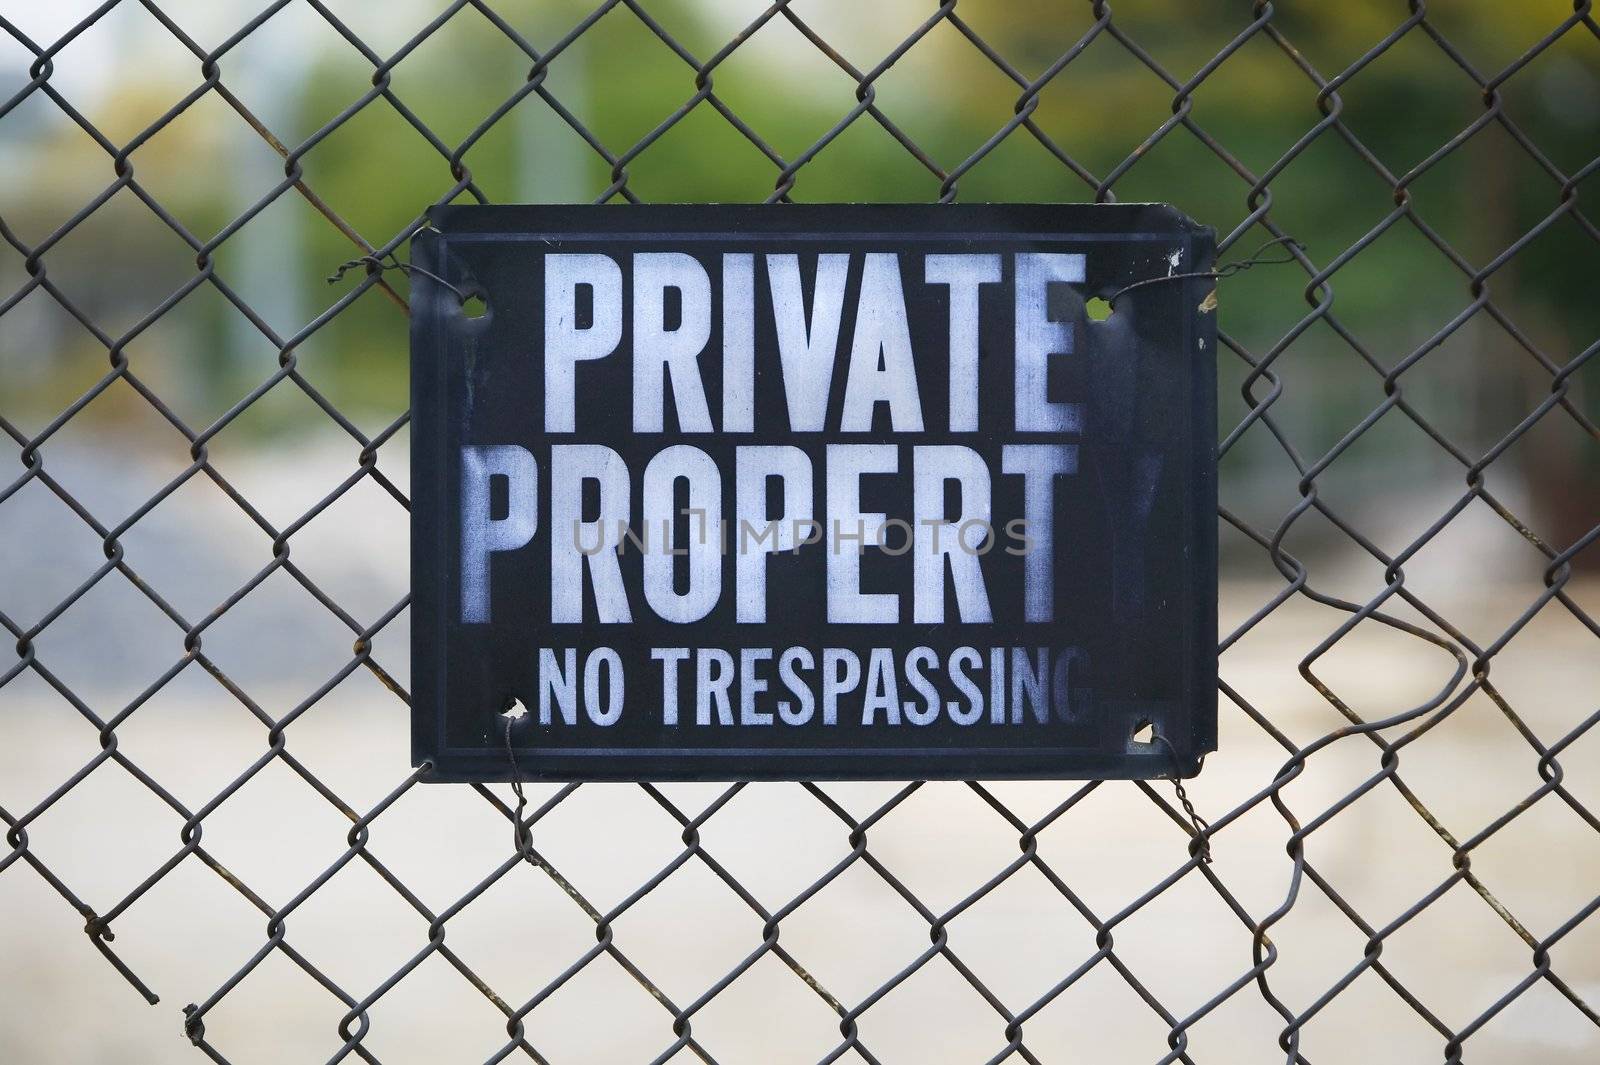 Private property sign on a rusty chain link fence.